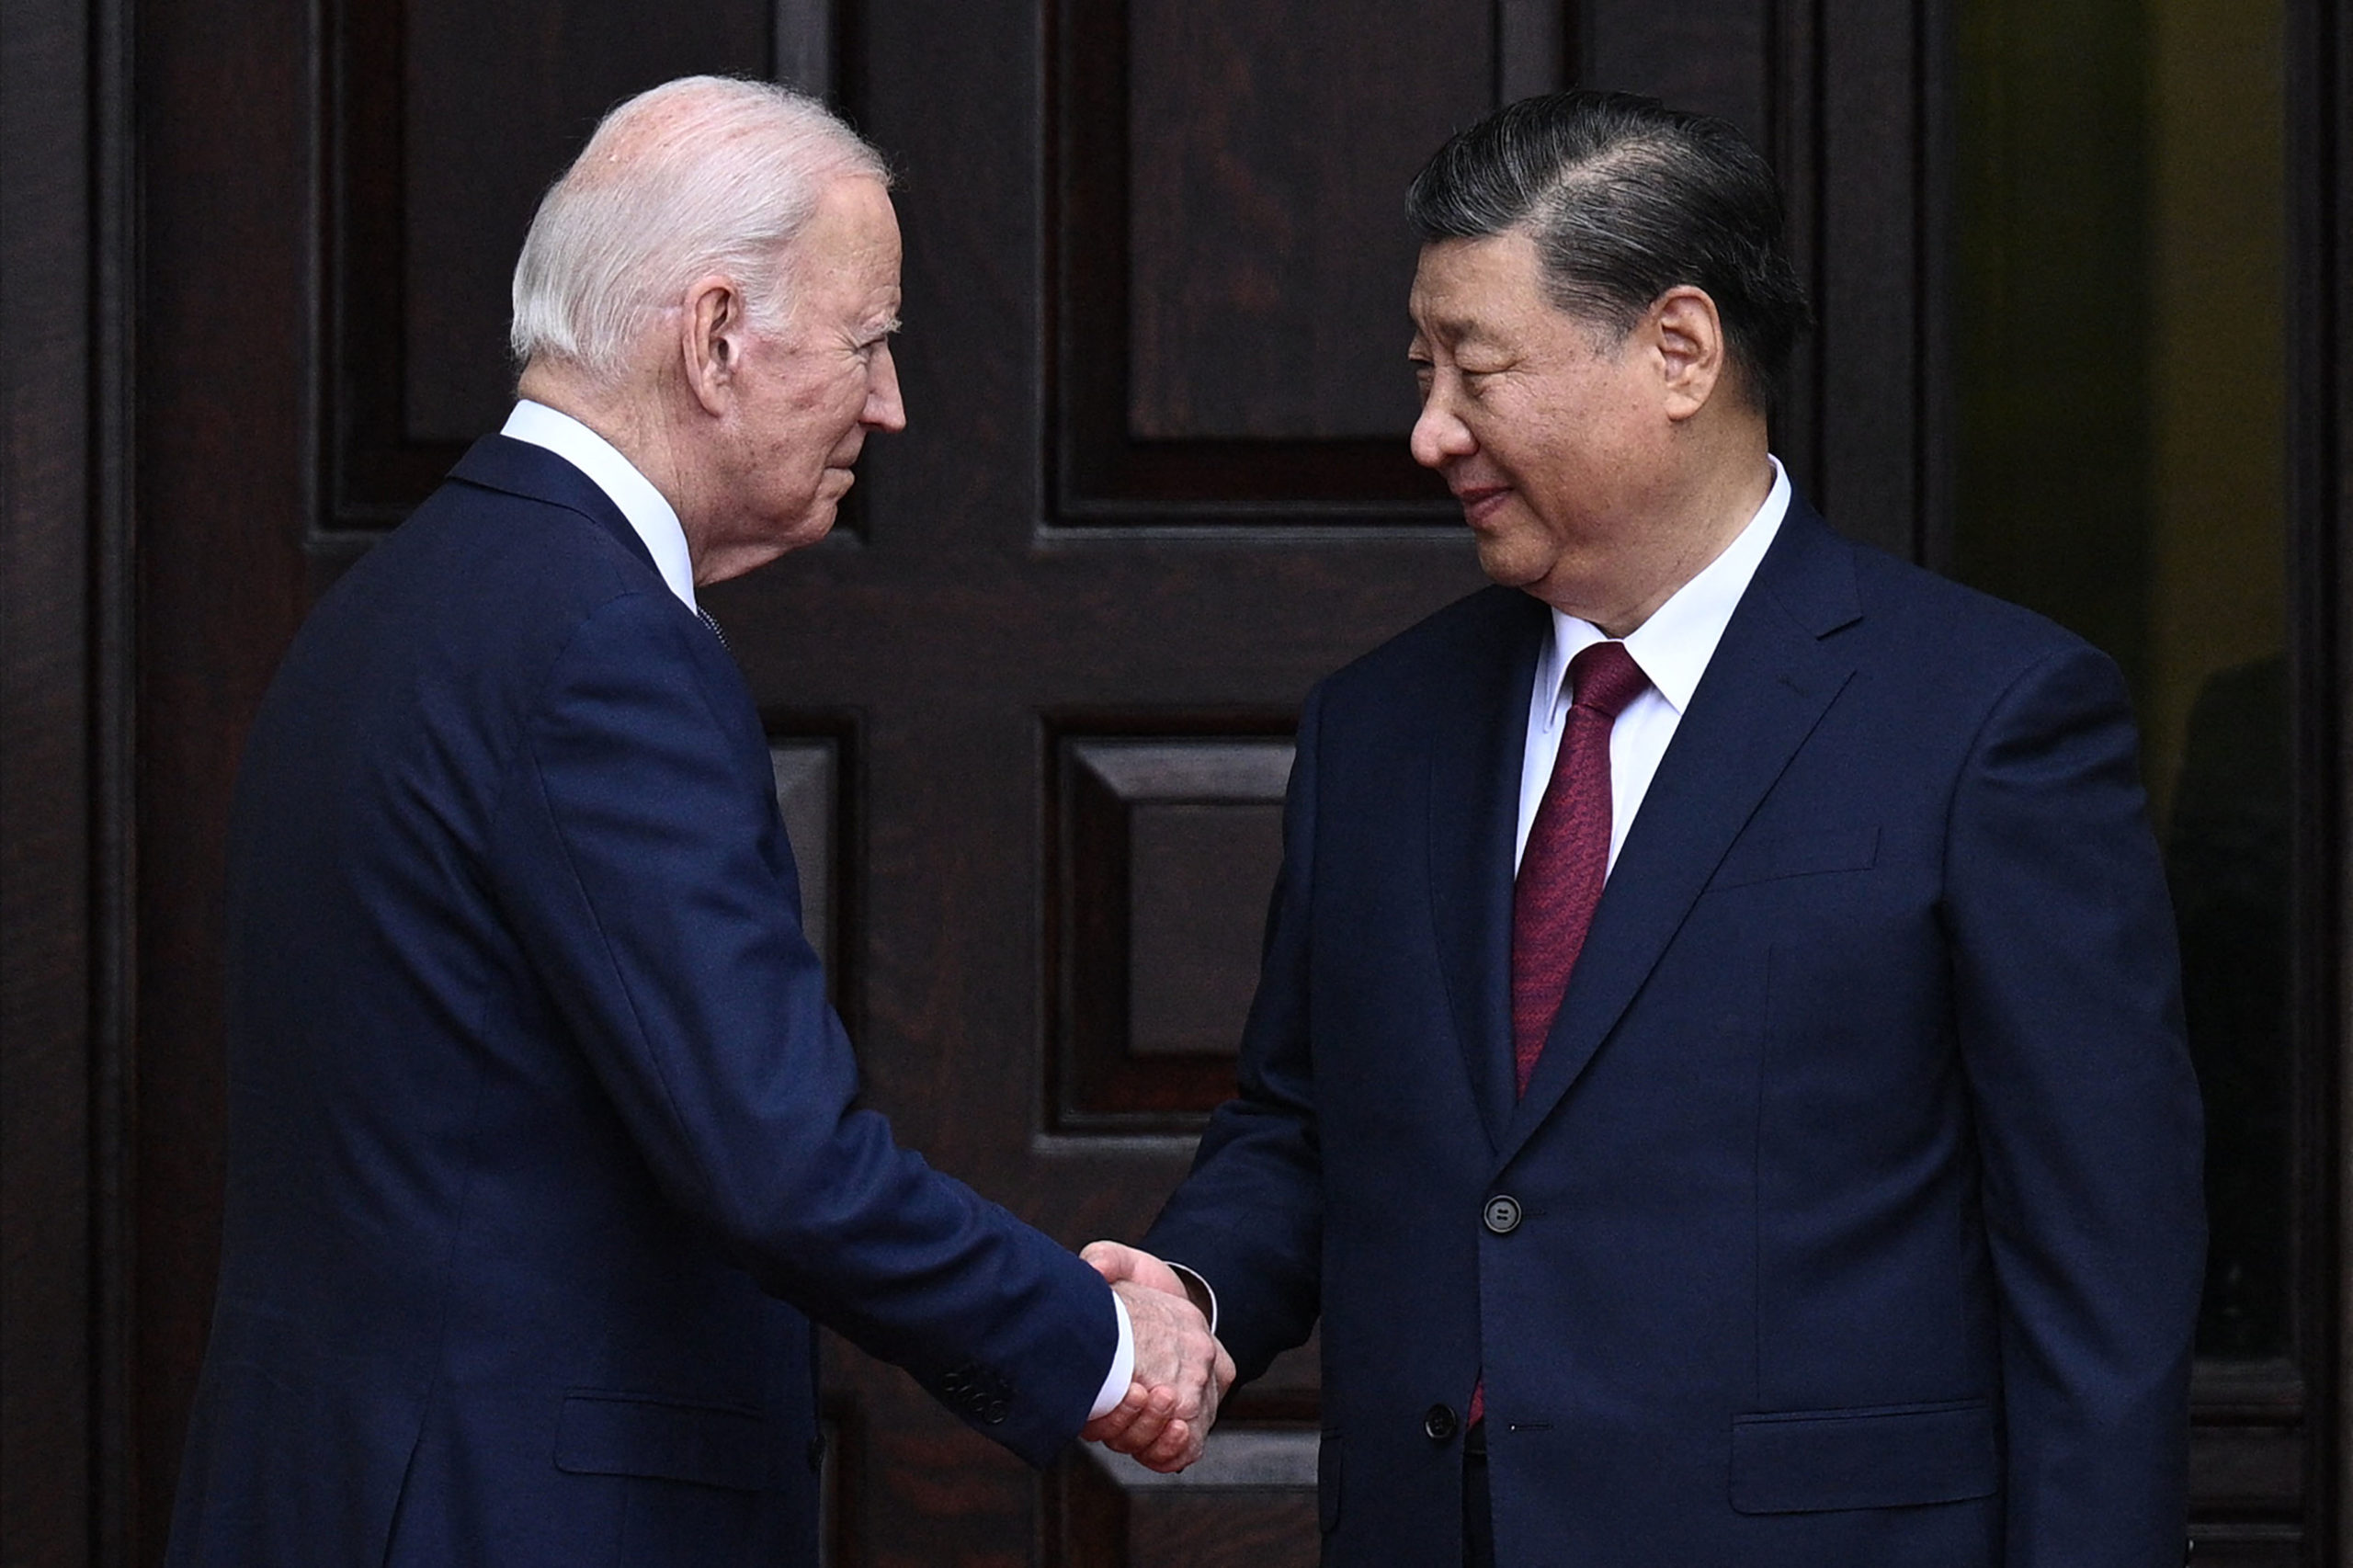 US President Joe Biden greets Chinese President Xi Jinping before a meeting during the Asia-Pacific Economic Cooperation (APEC) Leaders' week in Woodside, California on November 15, 2023. Biden and Xi will try to prevent the superpowers' rivalry spilling into conflict when they meet for the first time in a year at a high-stakes summit in San Francisco on Wednesday. With tensions soaring over issues including Taiwan, sanctions and trade, the leaders of the world's largest economies are expected to hold at least three hours of talks at the Filoli country estate on the city's outskirts. (Photo by Brendan SMIALOWSKI / AFP) (Photo by BRENDAN SMIALOWSKI/AFP via Getty Images)